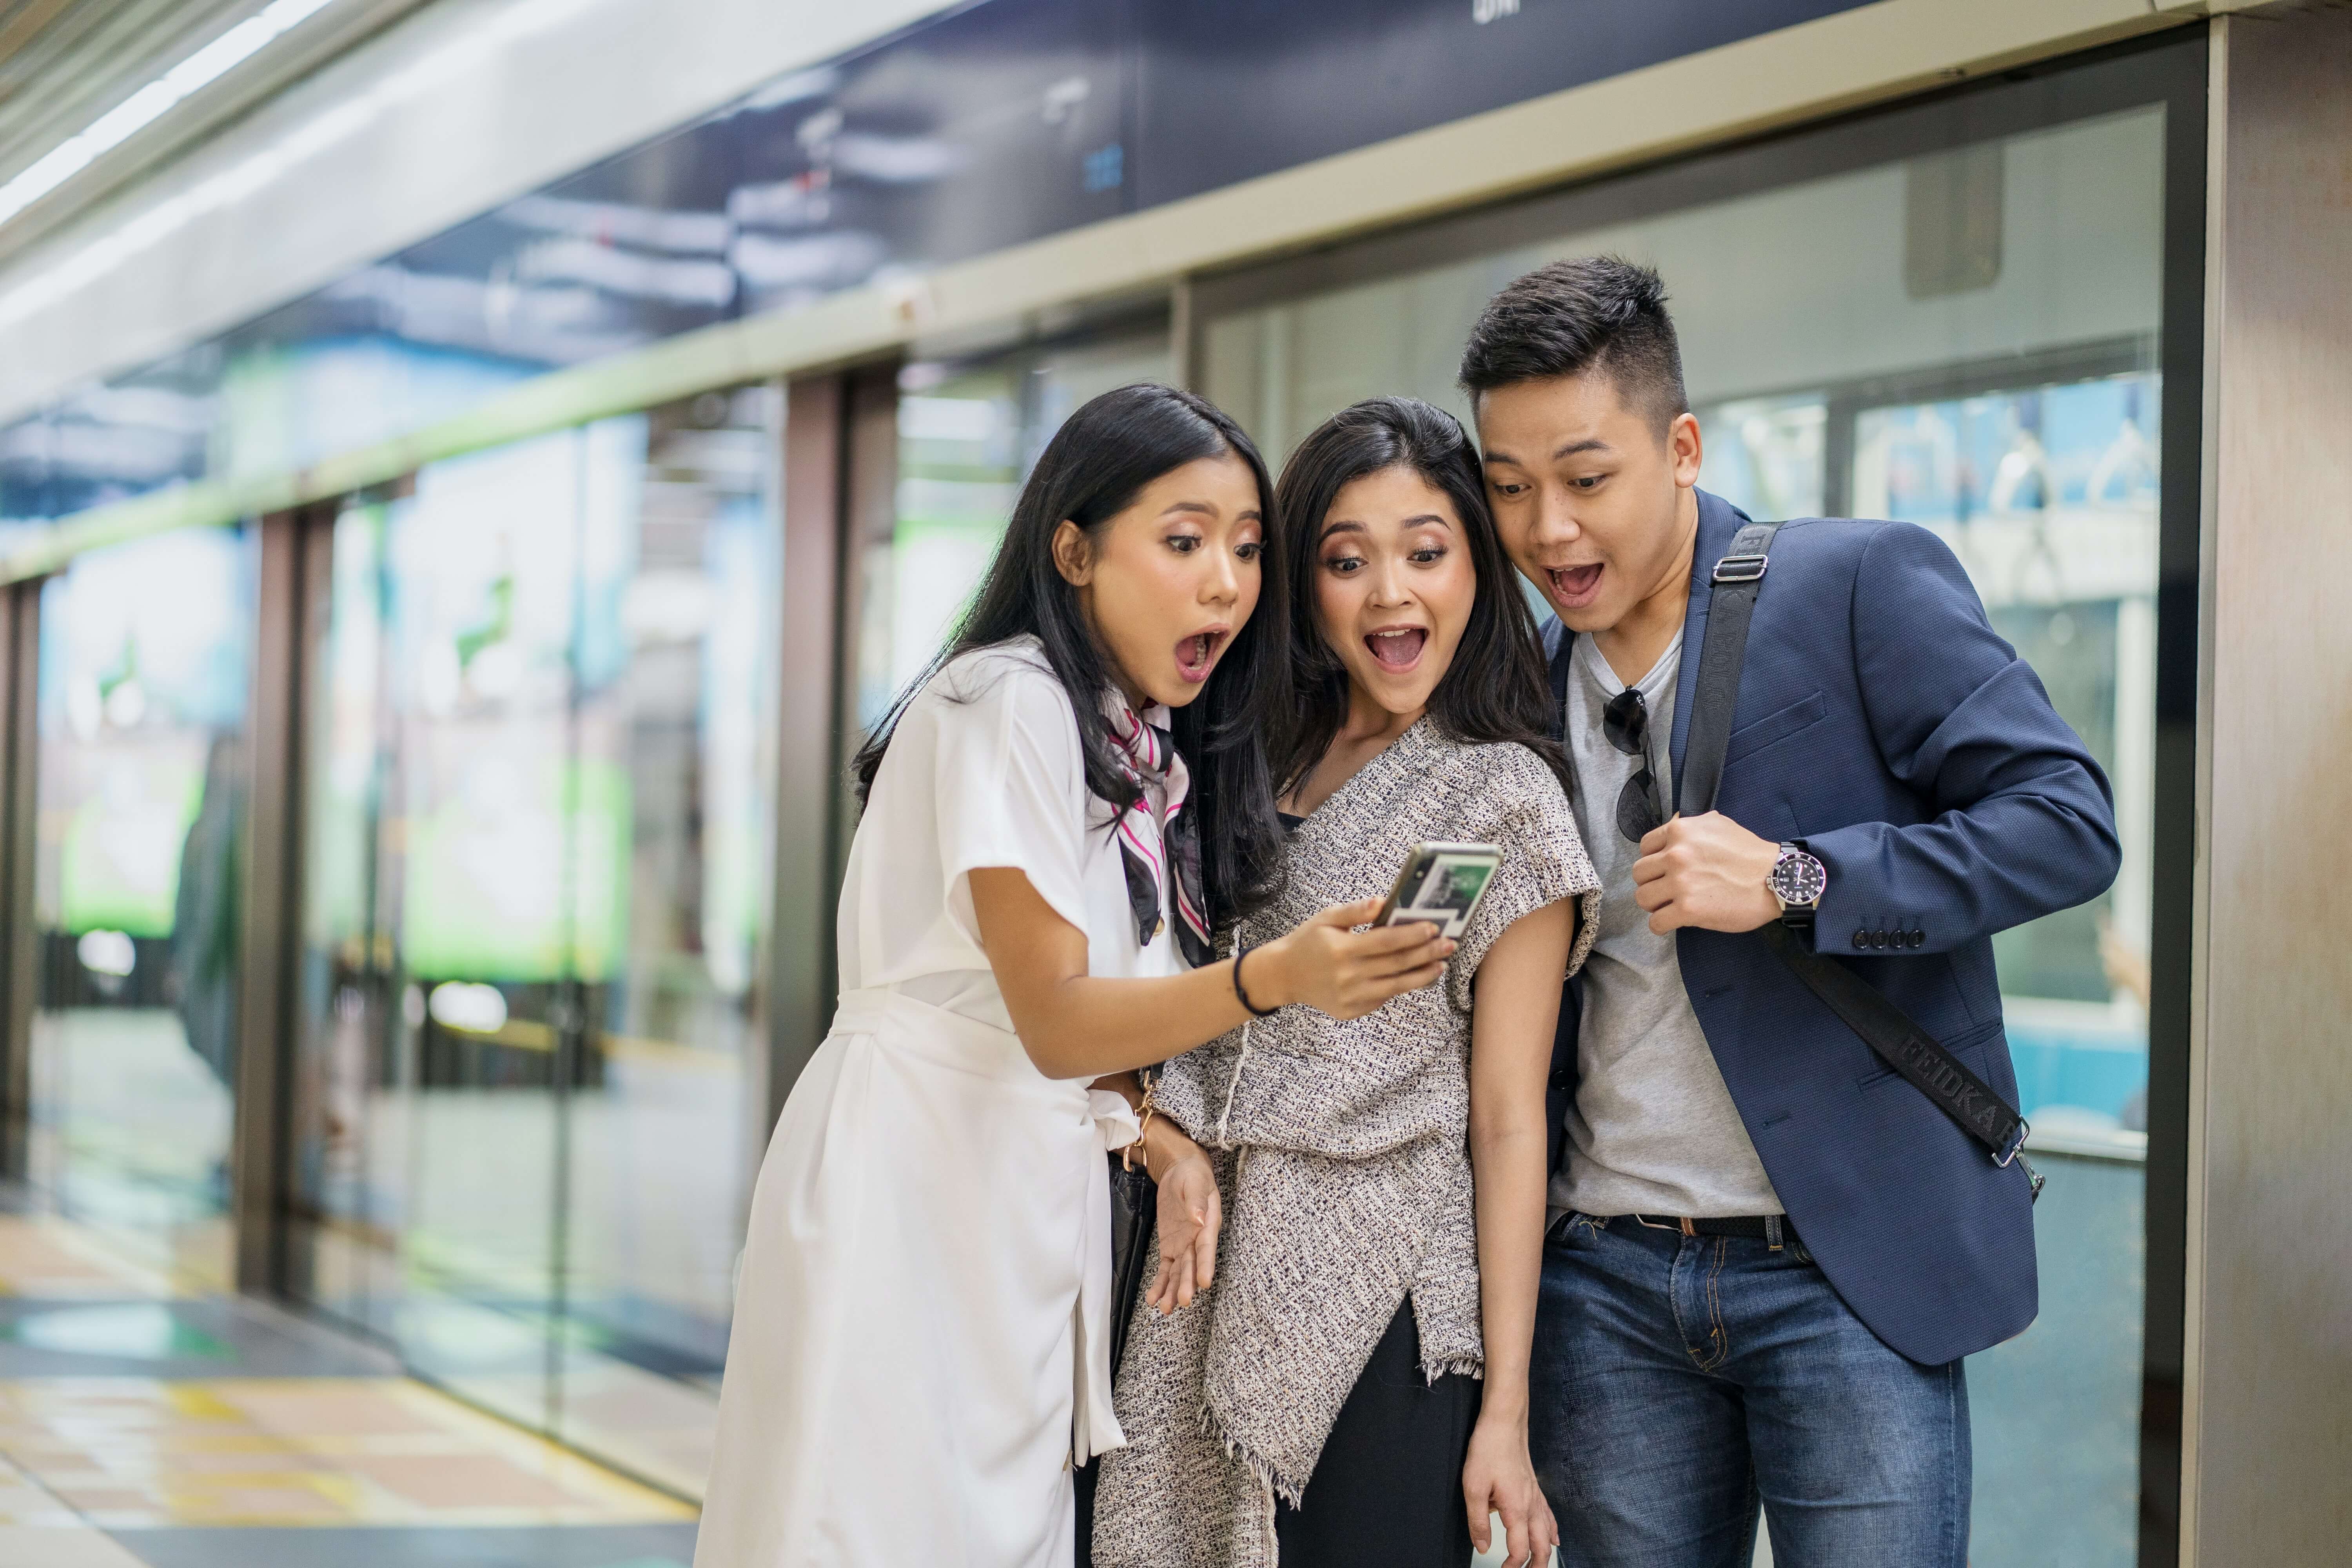 Three people looking at a phone with excited expressions